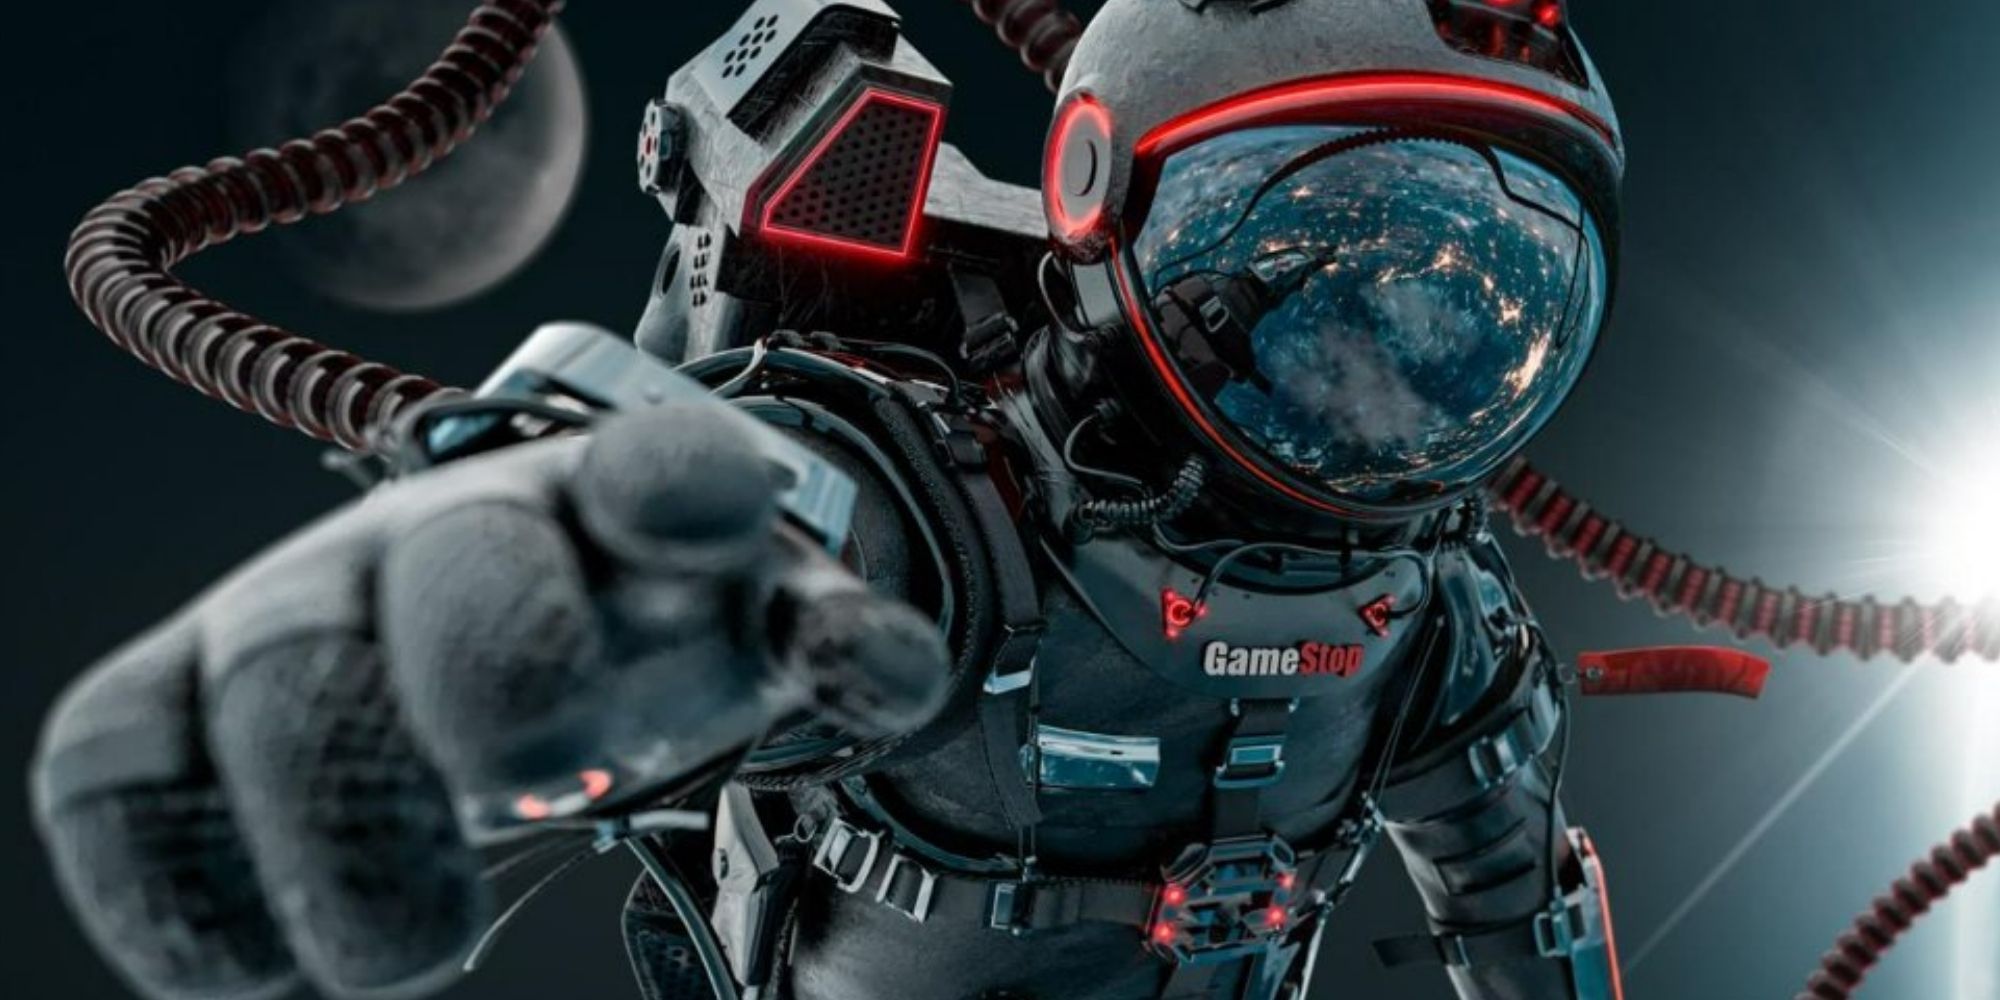 An astronaut in space with a GameStop logo on their suit